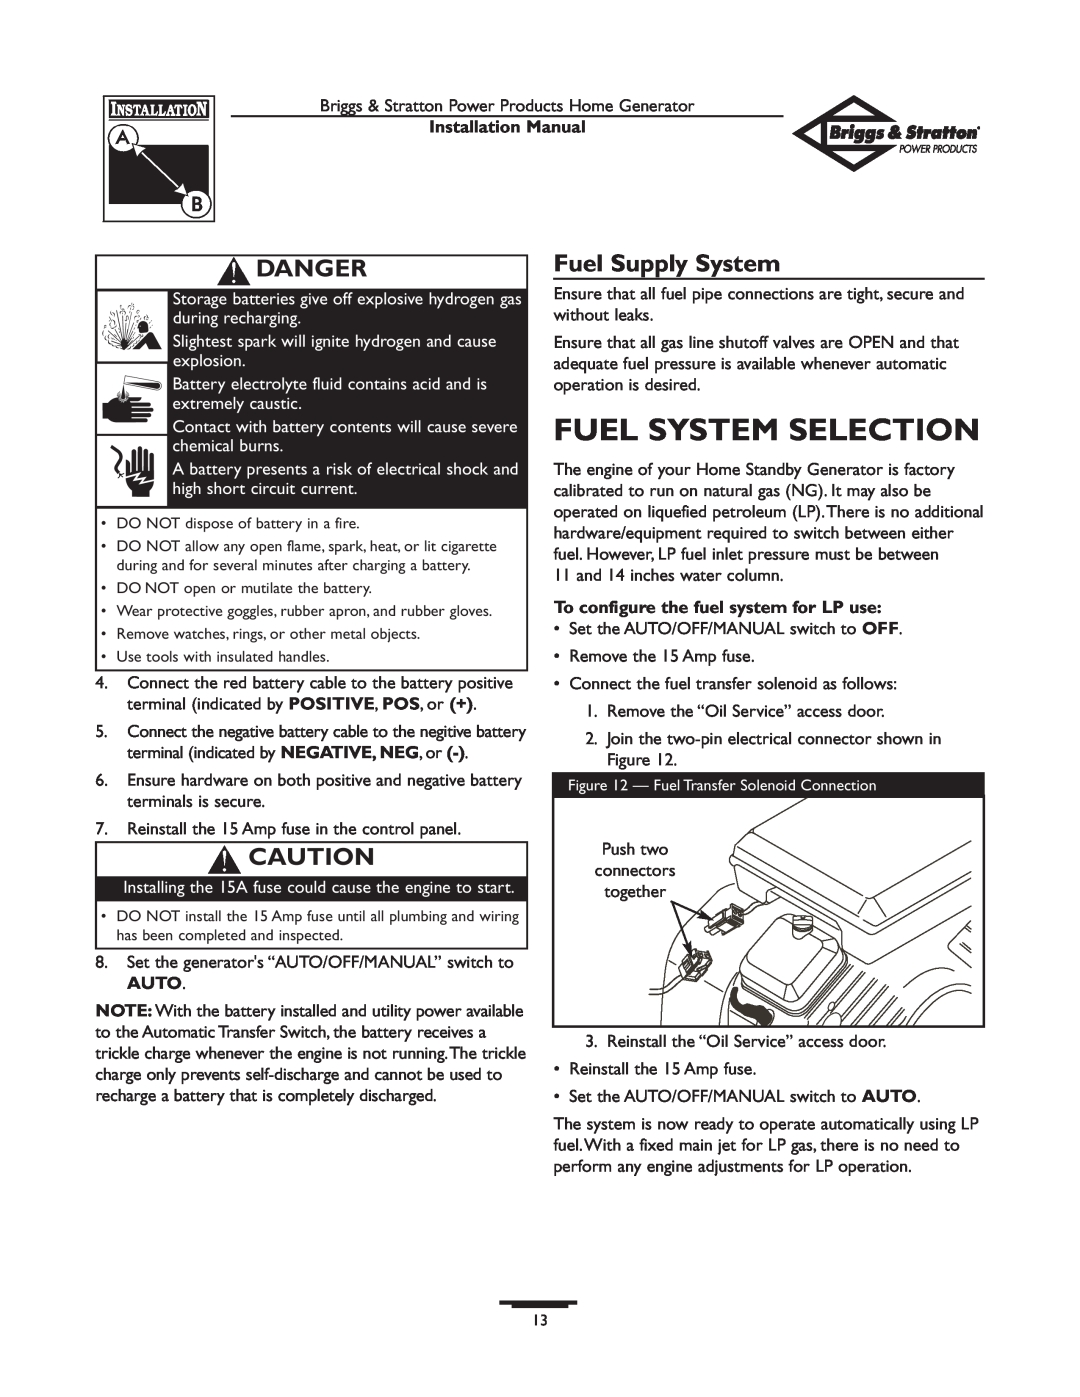 Briggs & Stratton 01938-0 manual Fuel System Selection, Fuel Supply System, To configure the fuel system for LP use, Danger 